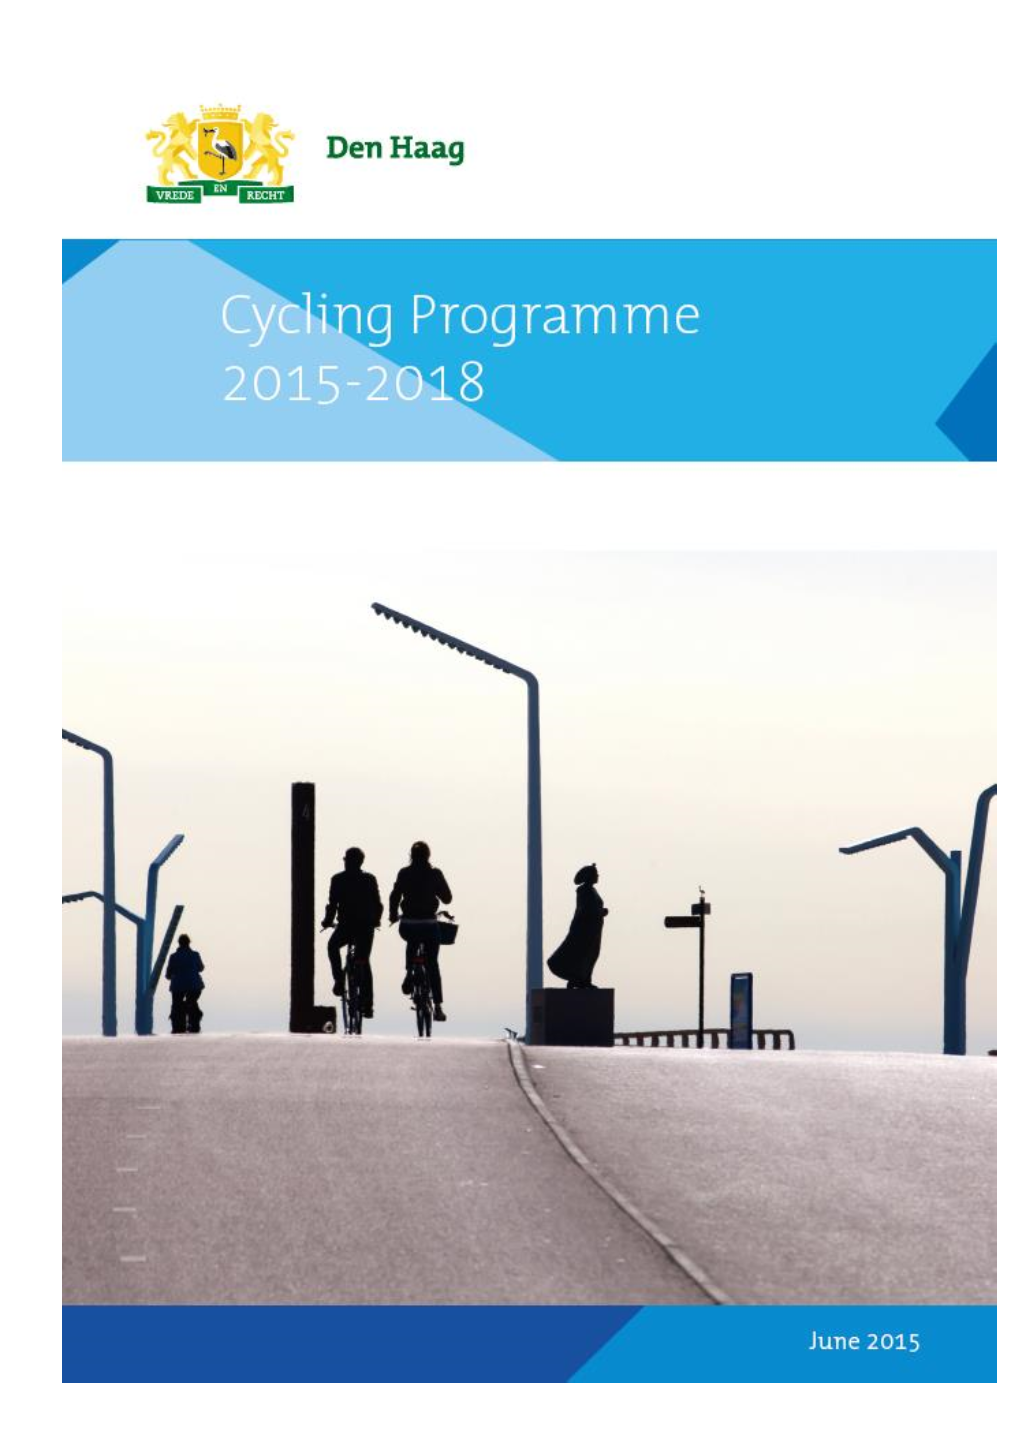 Multiannual Cycling Programme 2015-2018